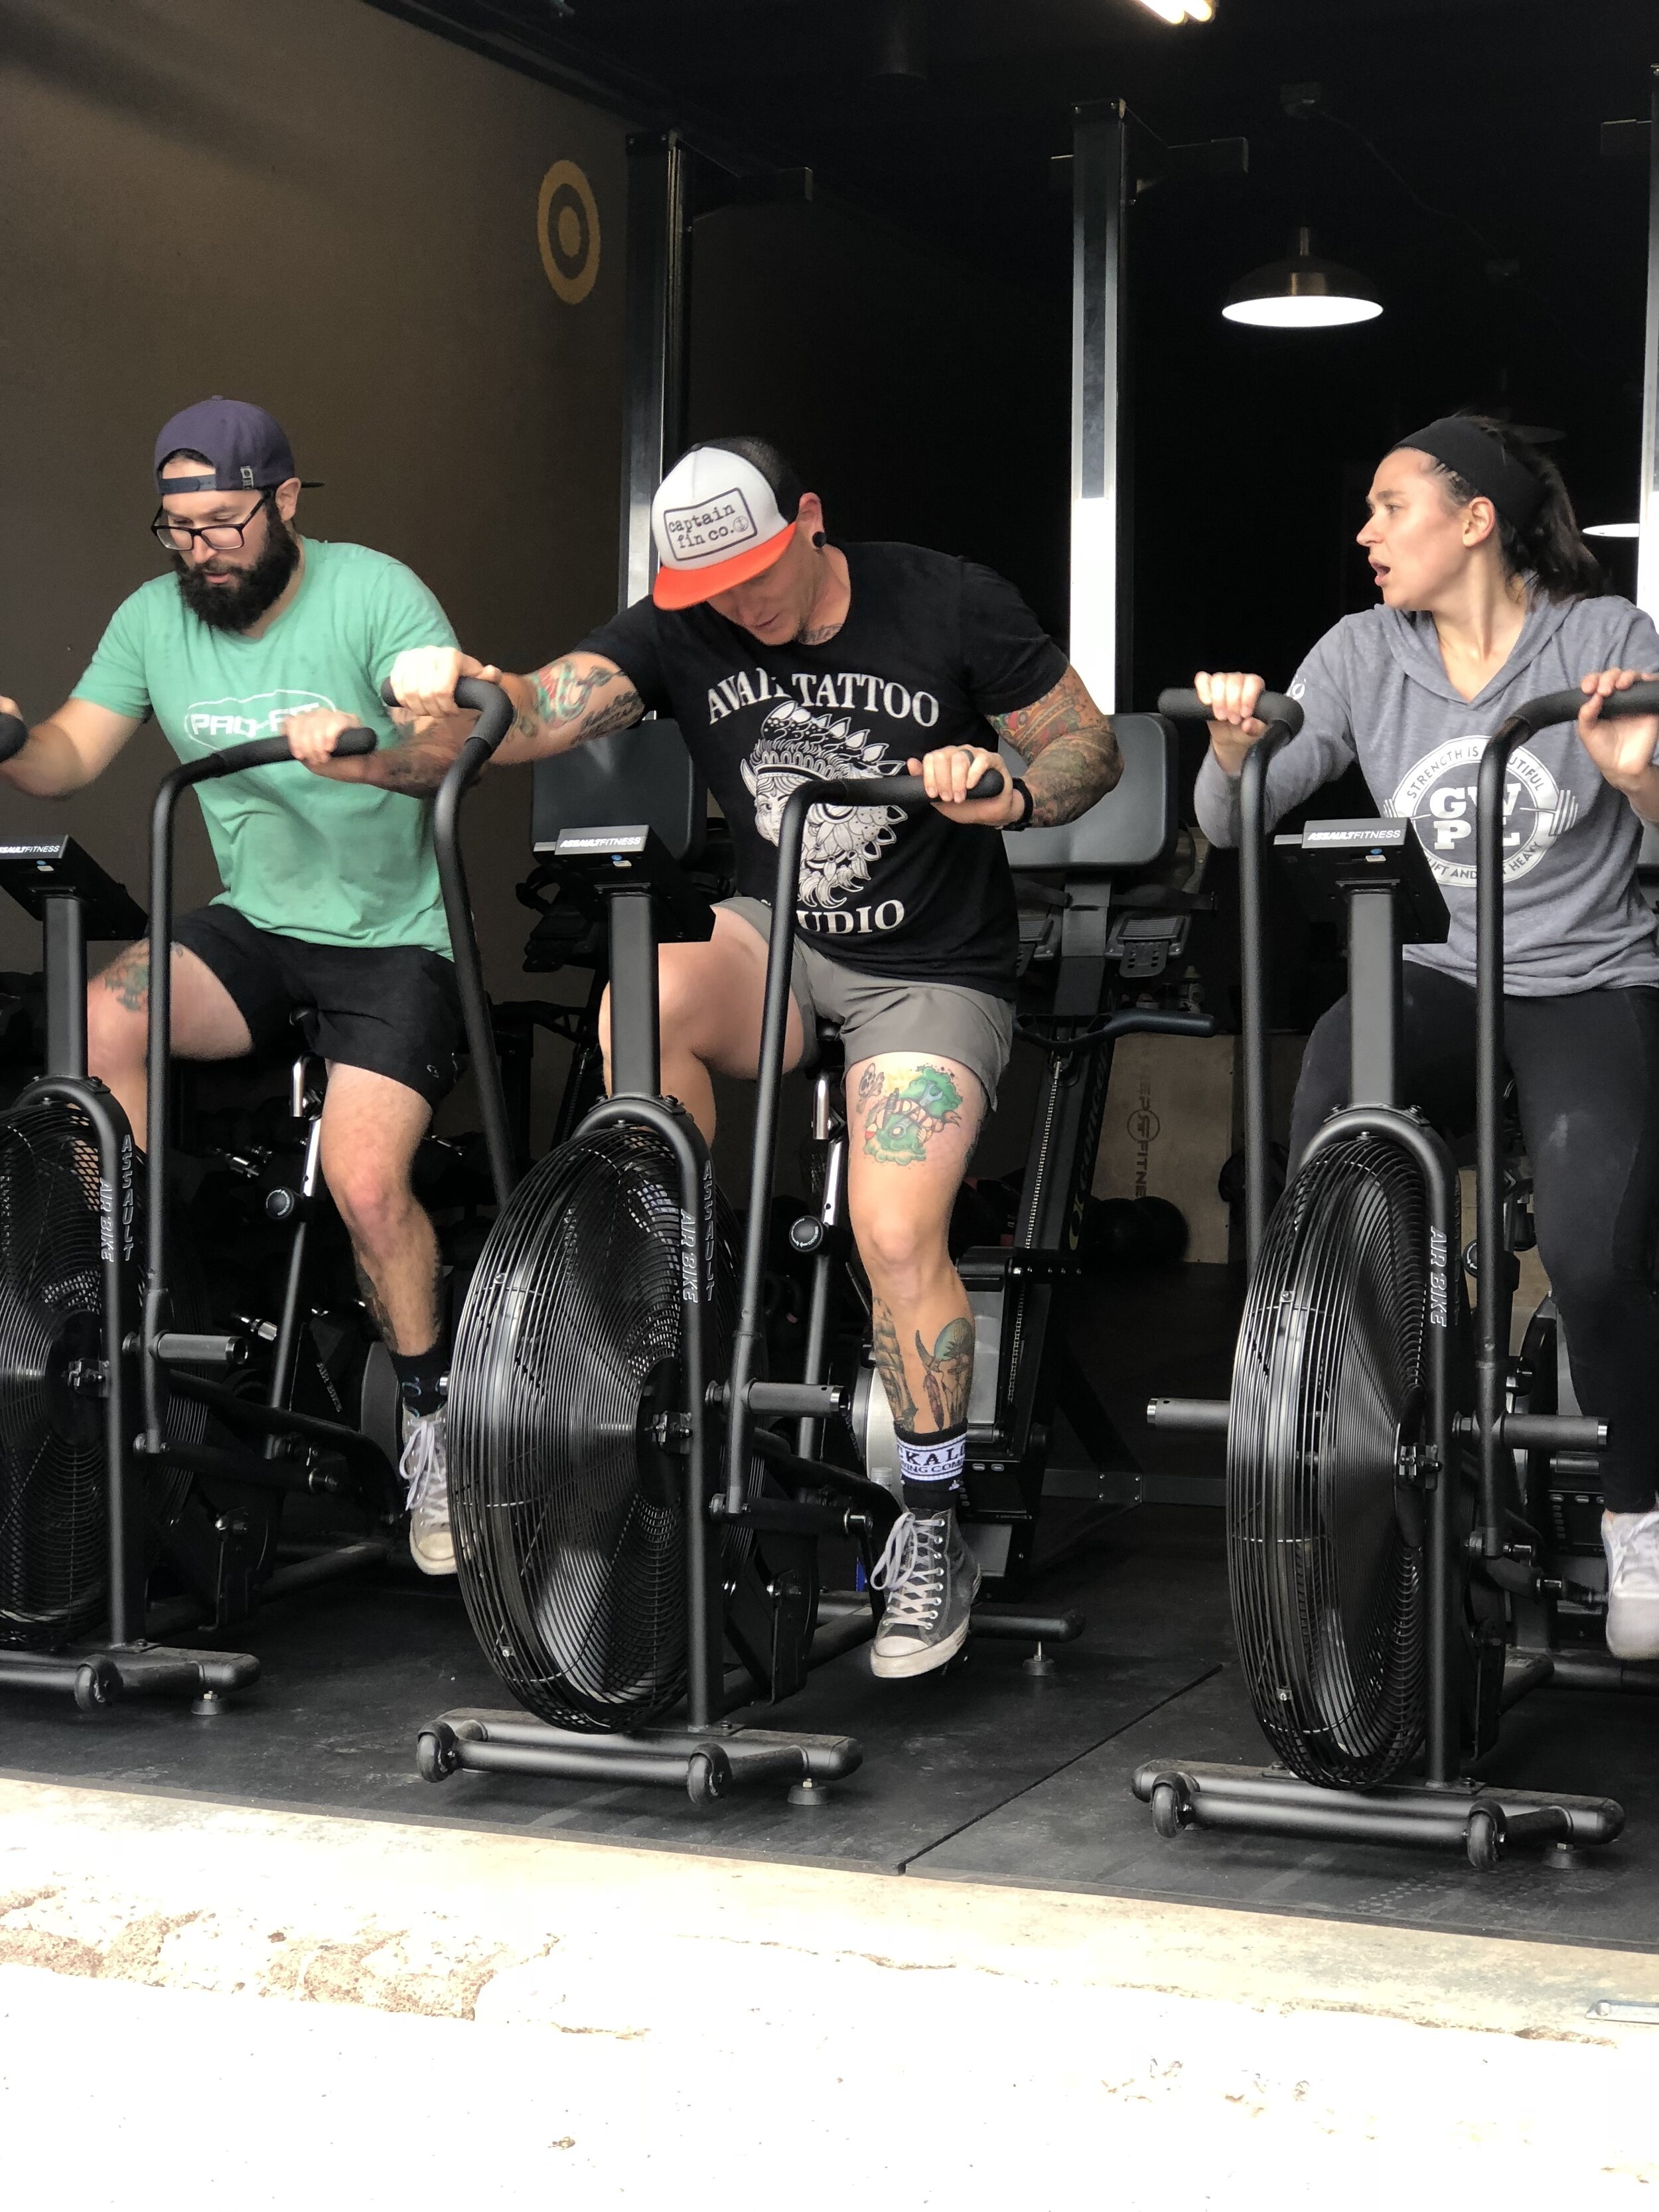 three people riding assault bikes at a gym